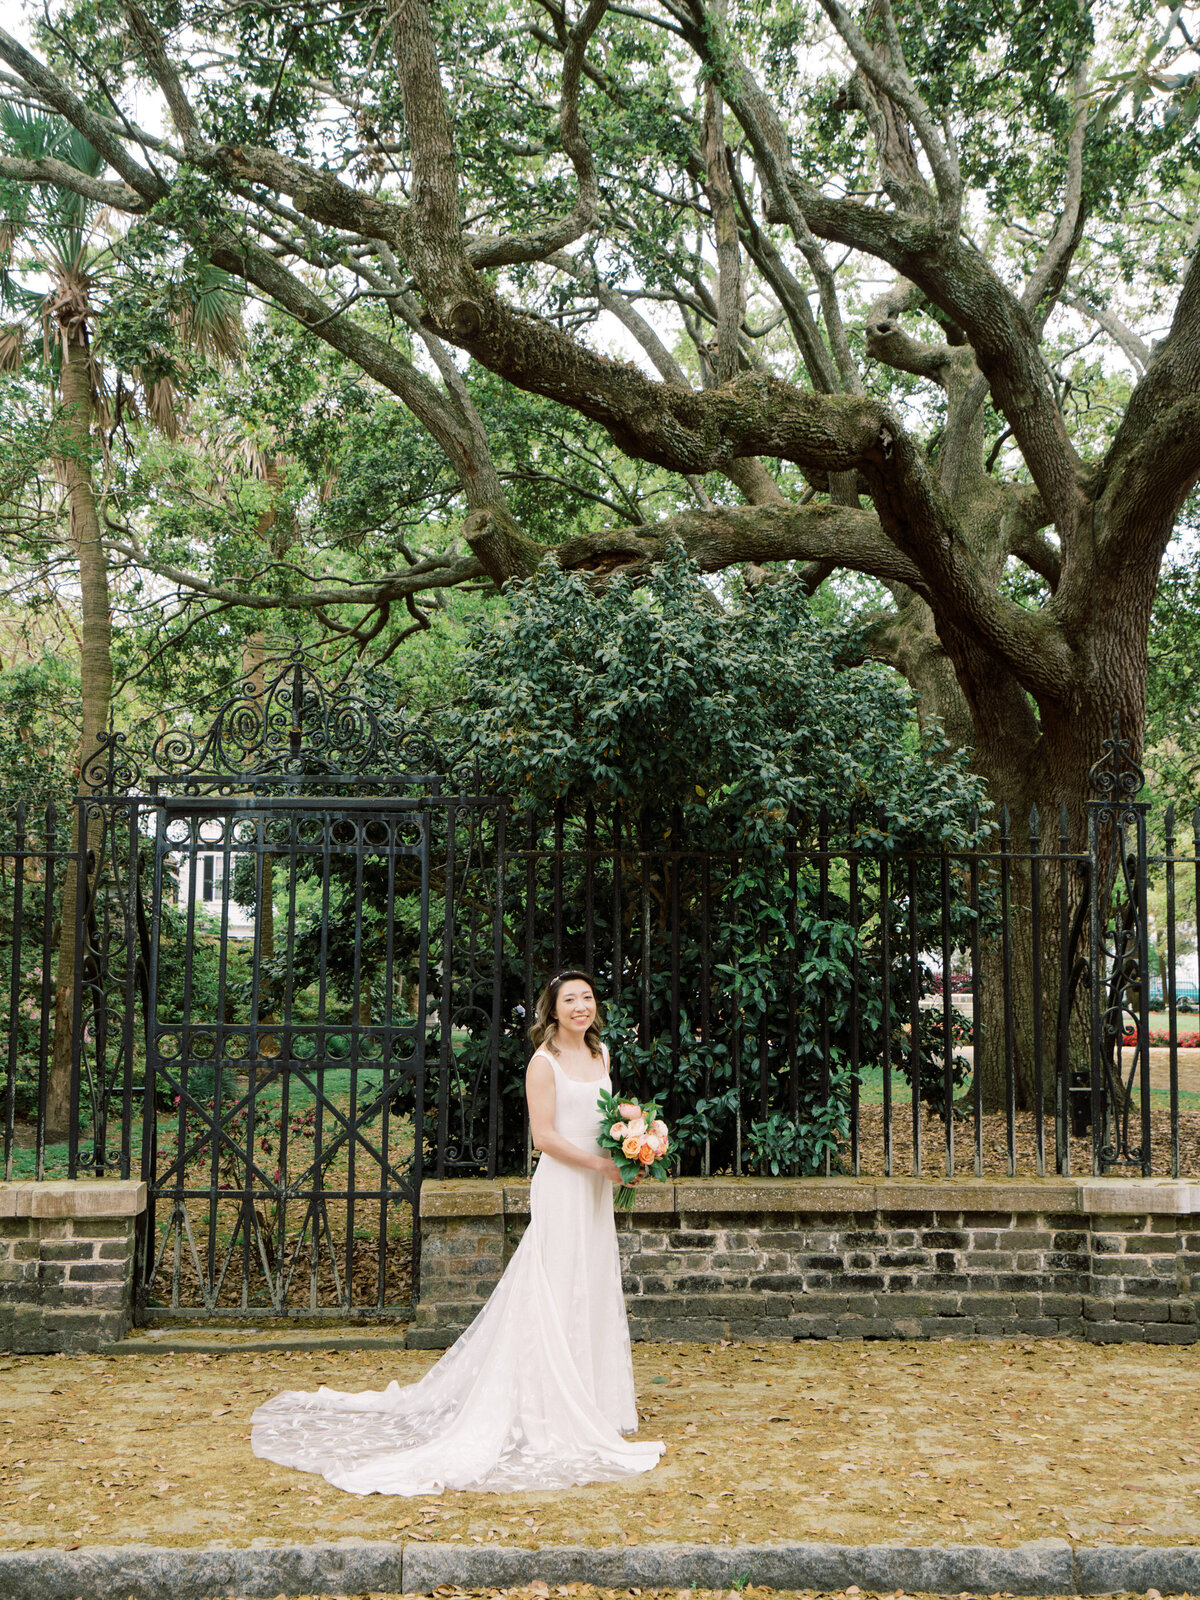 Cannon-Green-Wedding-in-charleston-photo-by-philip-casey-photography-050